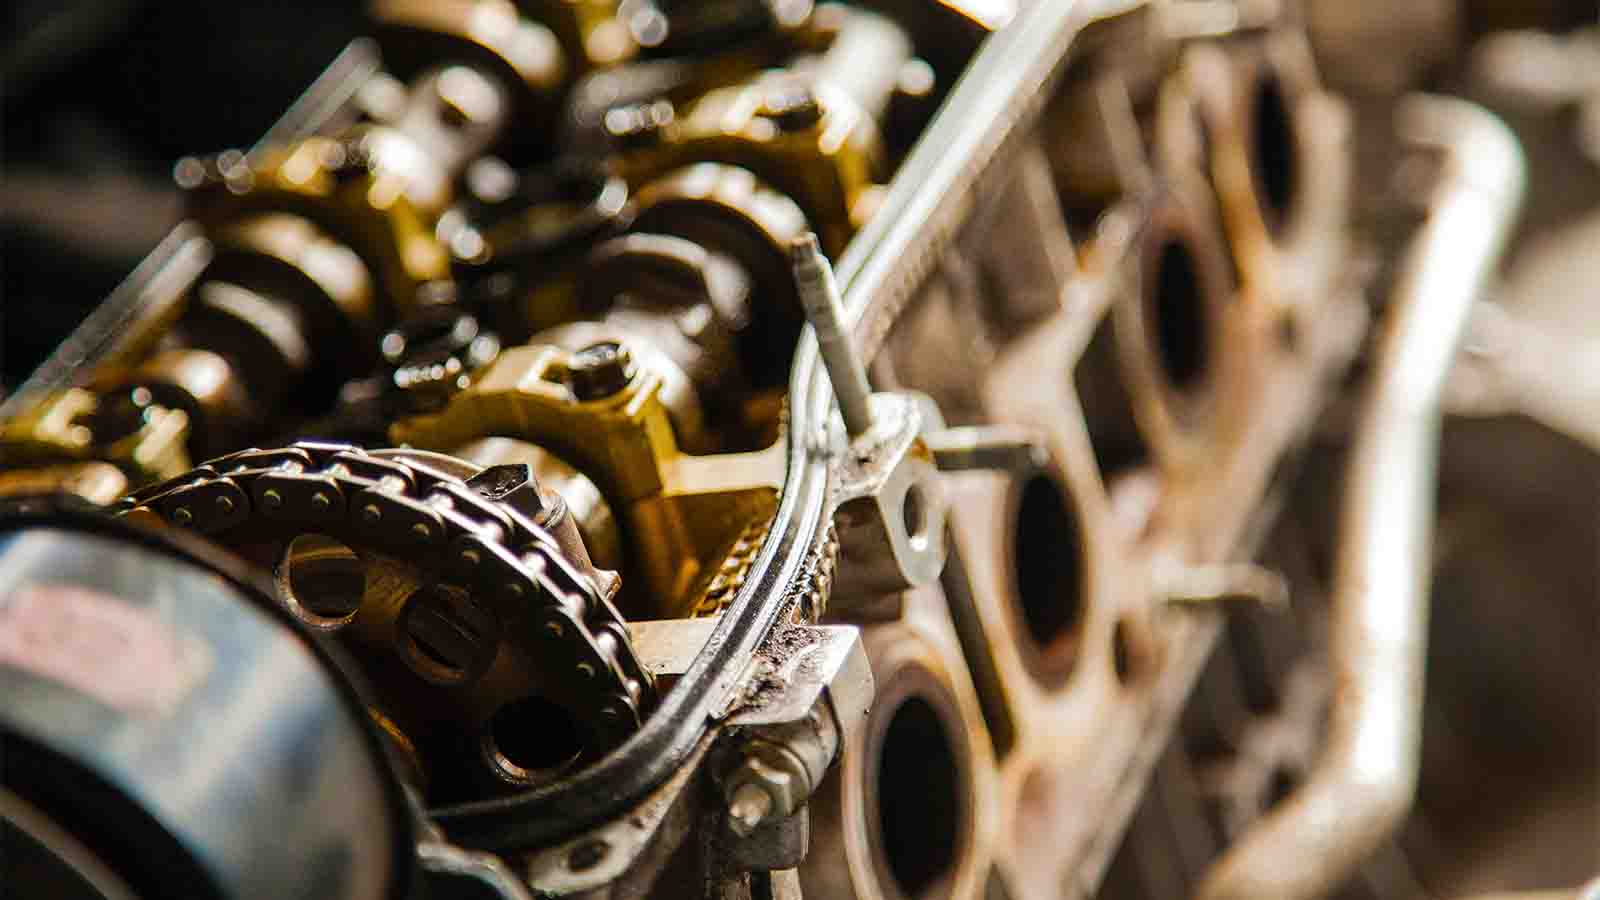 What parts of the engine does oil lubricate?